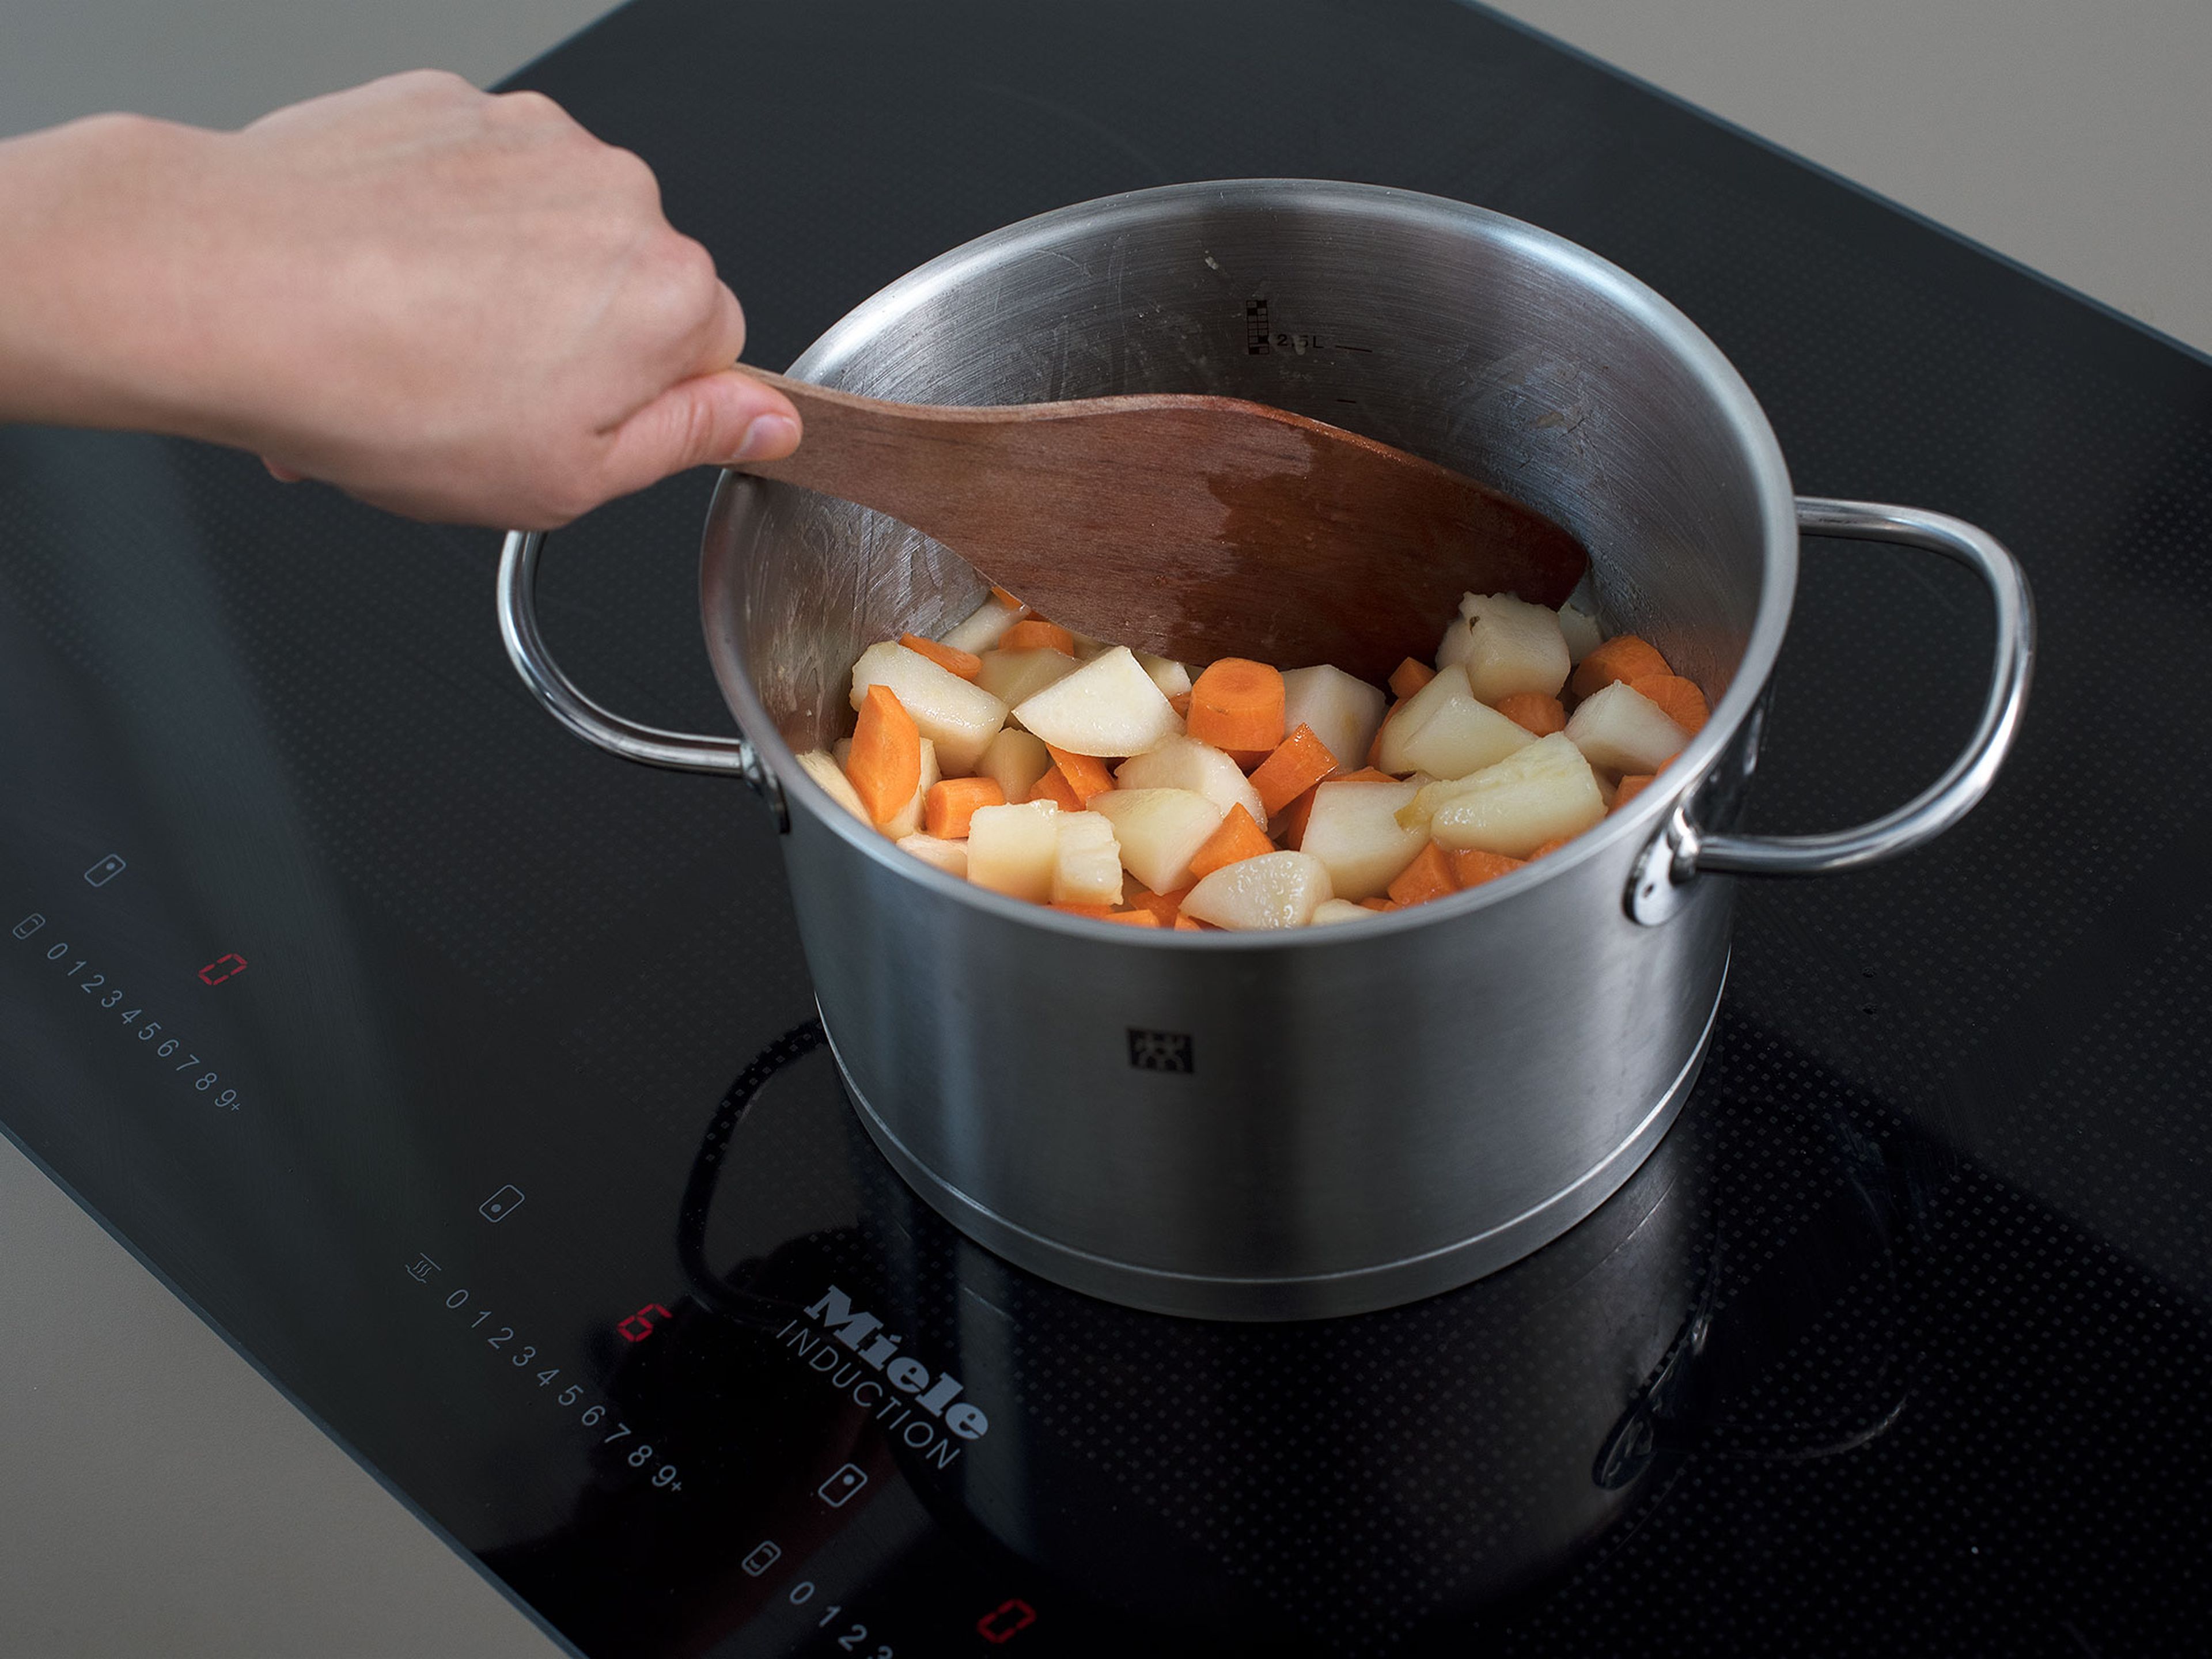 Add butter to saucepan. As soon as it’s melted, add sugar and stir until fully dissolved. Add pear pieces to saucepan and stir until caramelized. Add carrot dices, stir, and let cook for approx. 5 min.